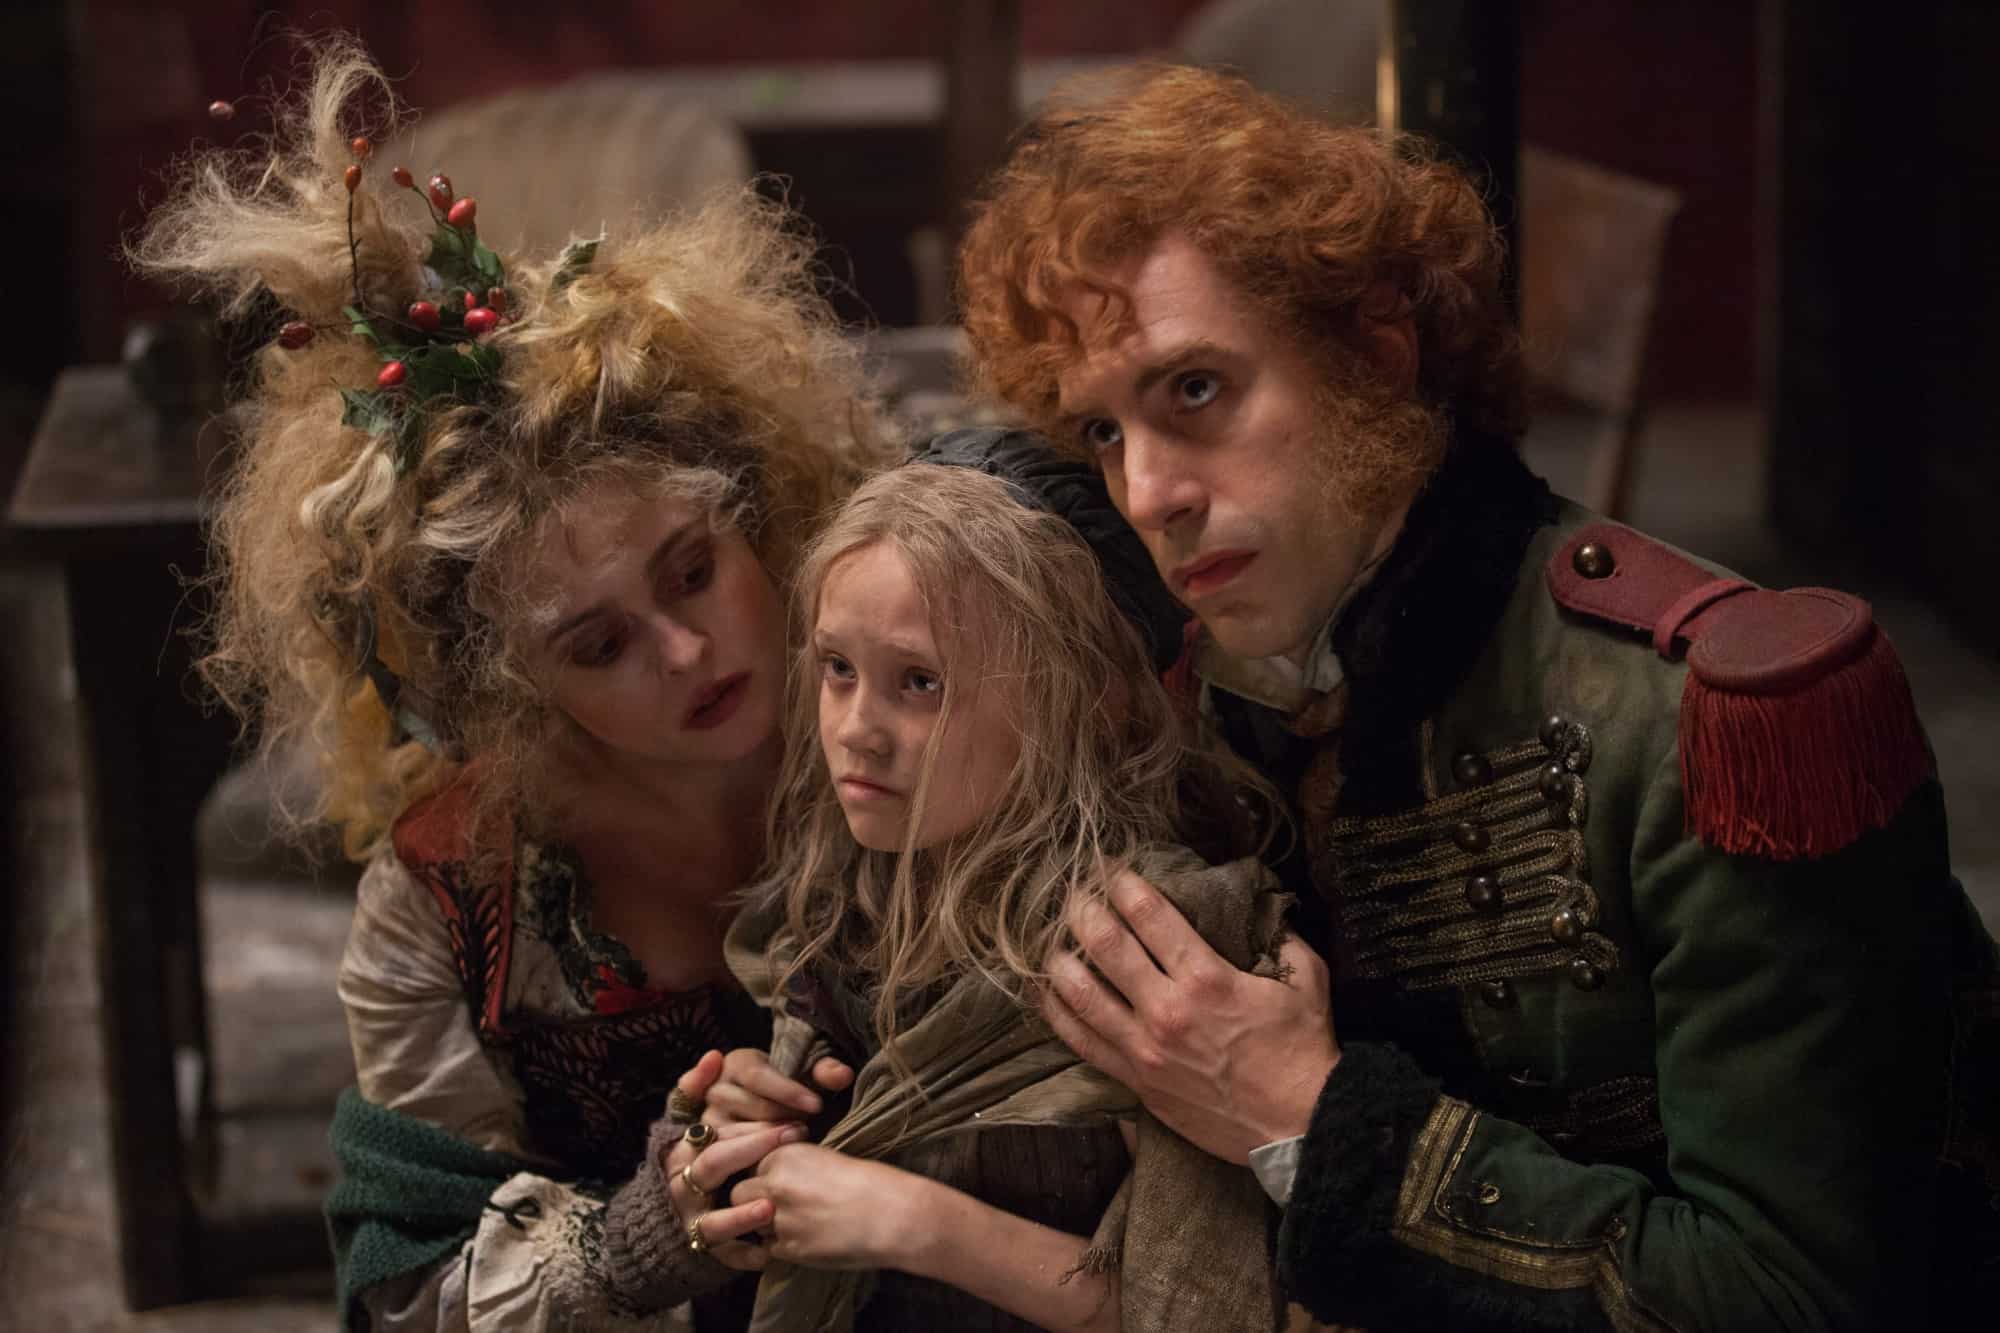 The Thenardiers